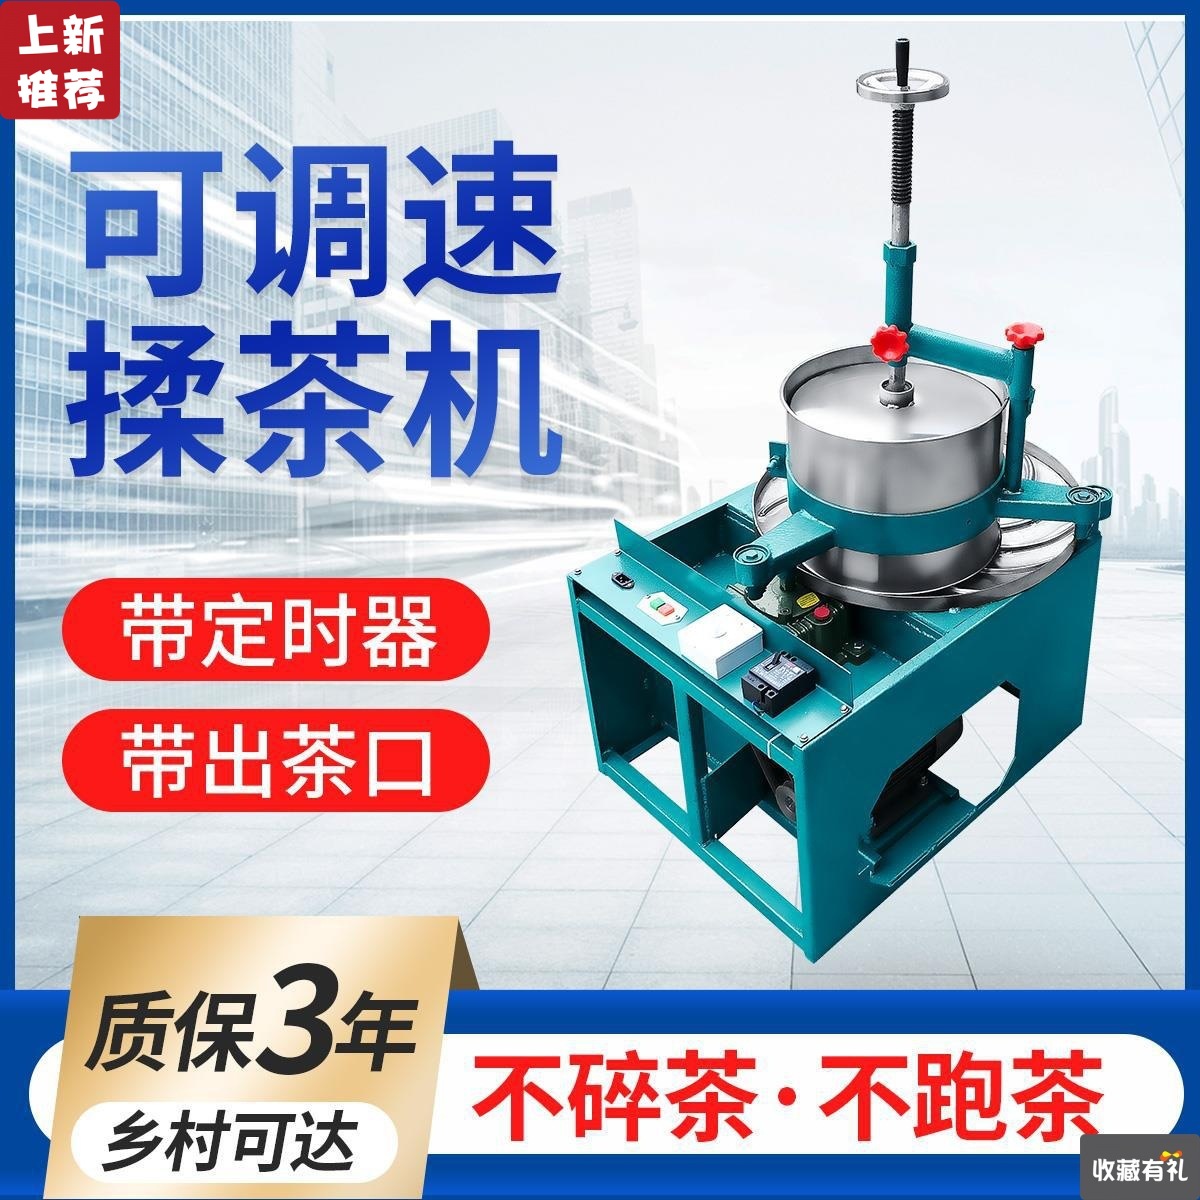 fully automatic Gear shift Stainless steel Electric Tea Twisting machine small-scale household Tea Mechanism machine